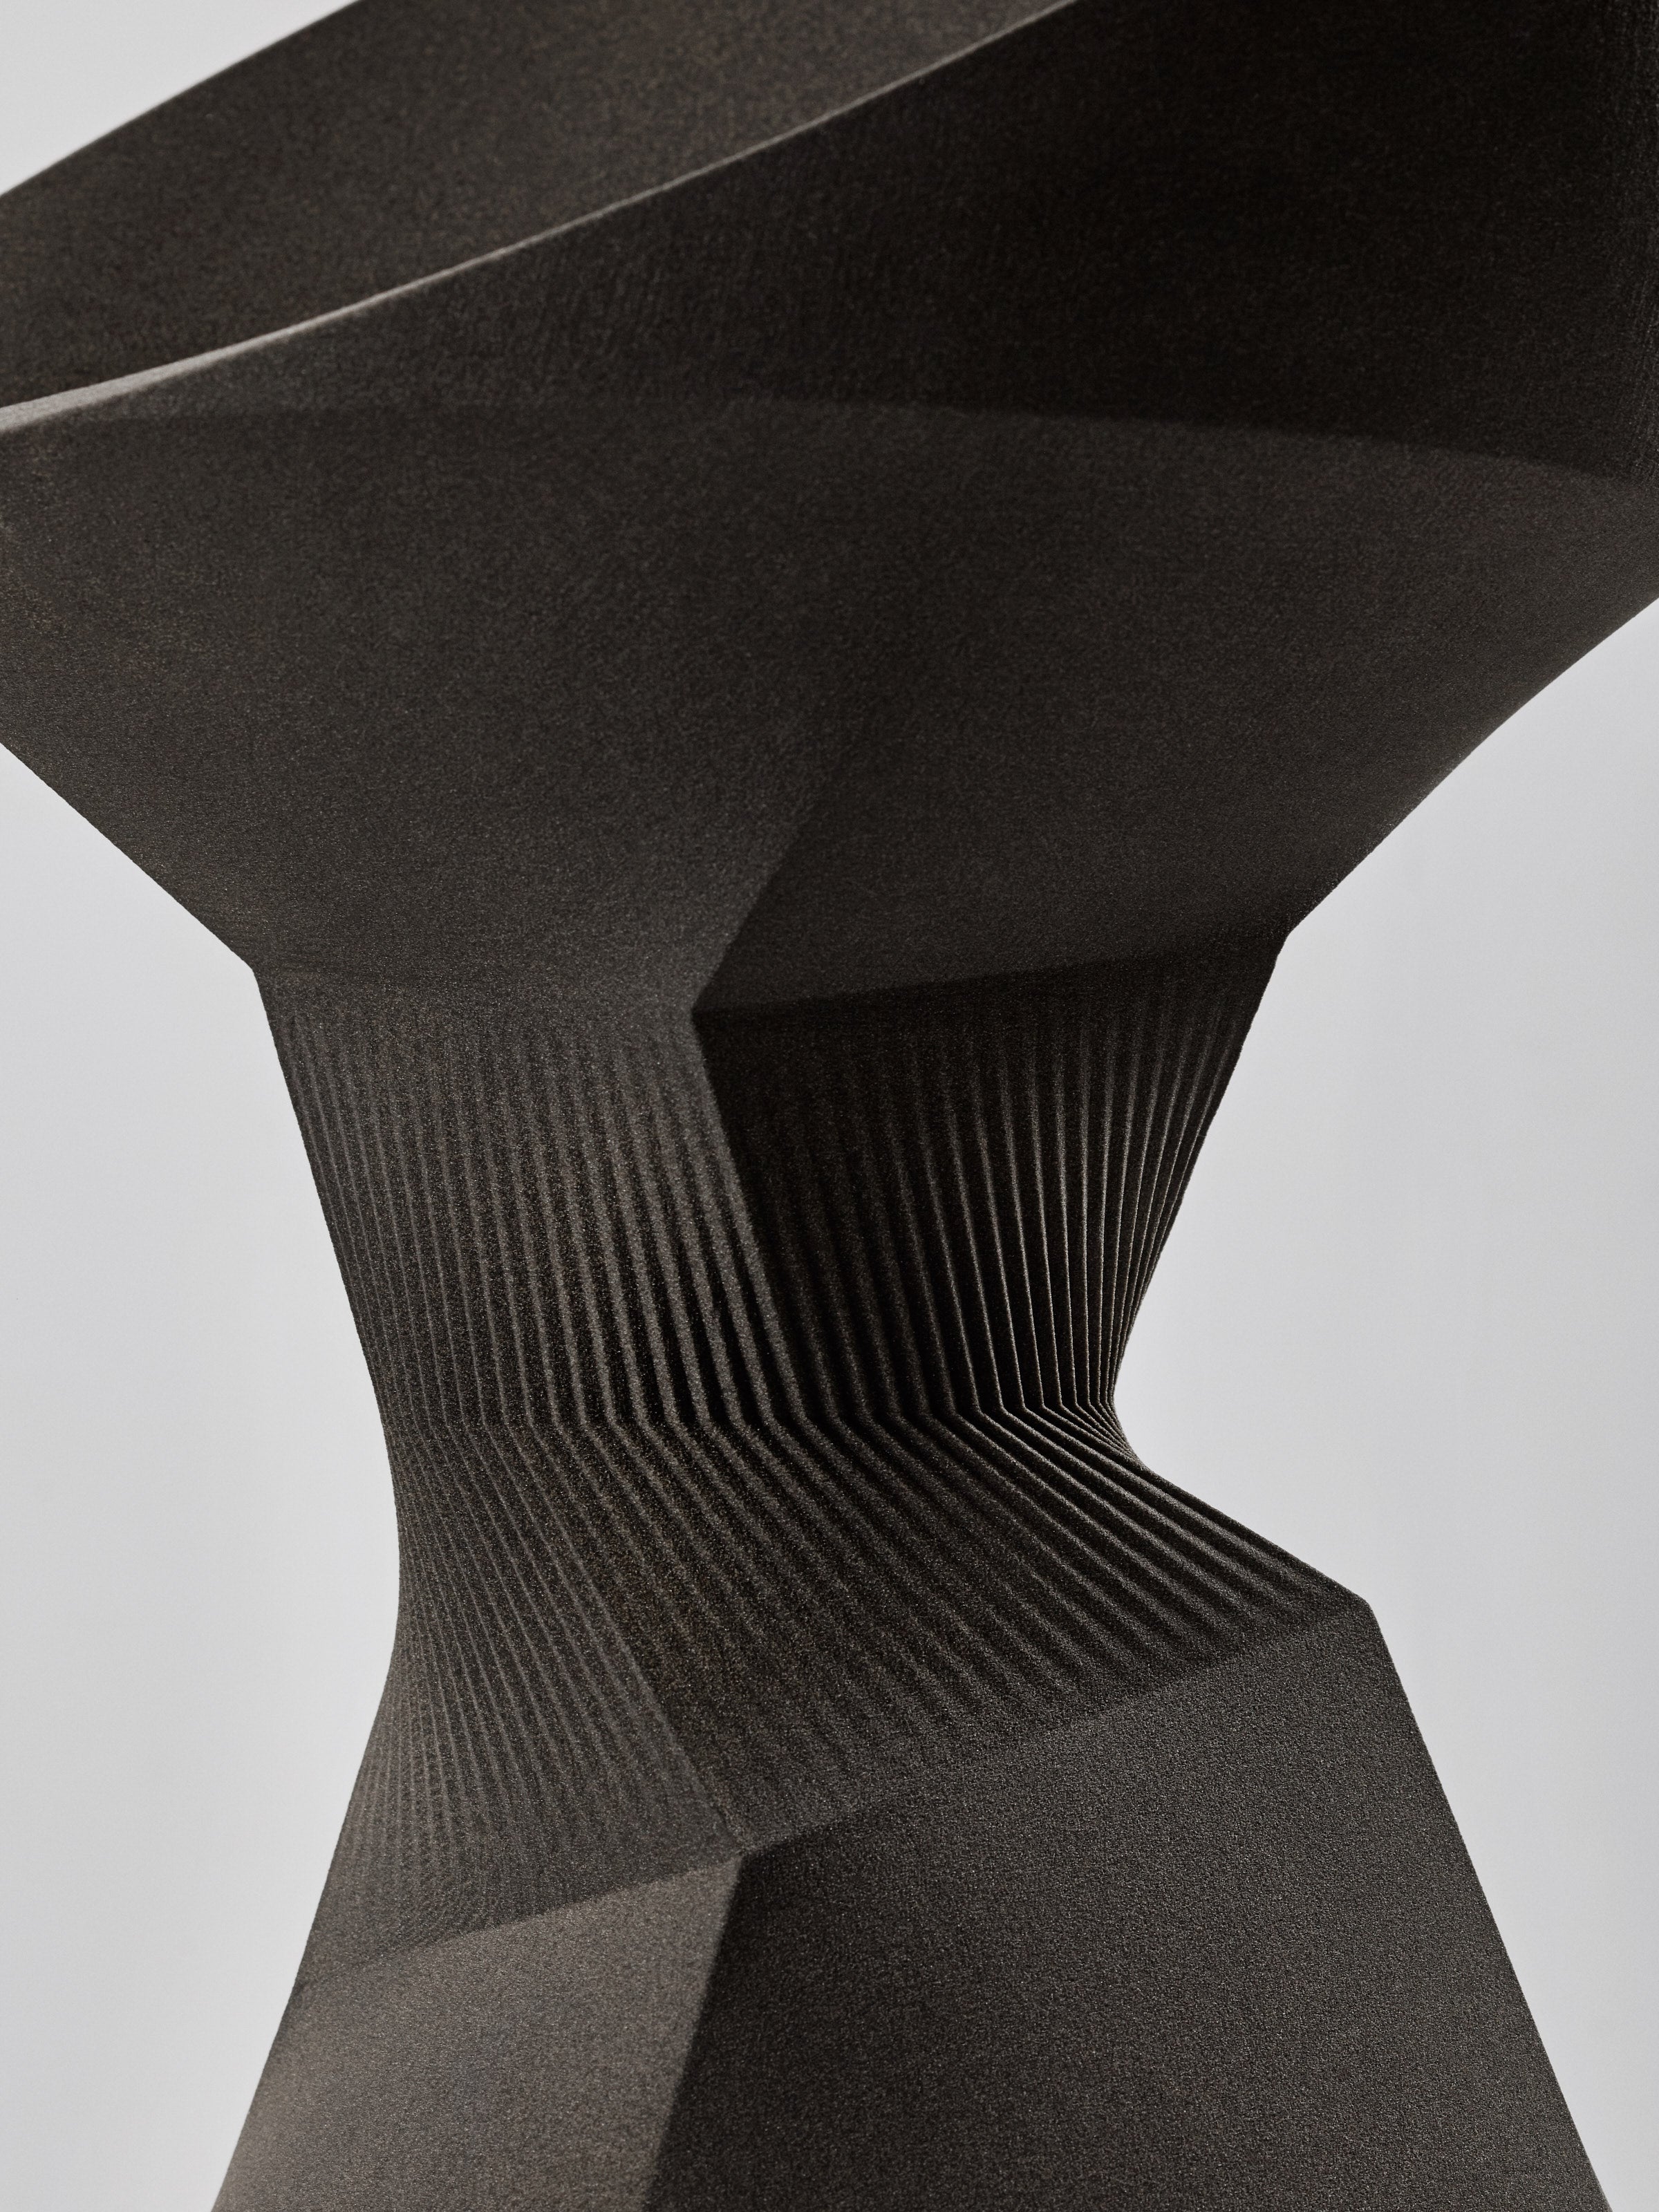 Pleat Chair by Rive Roshan